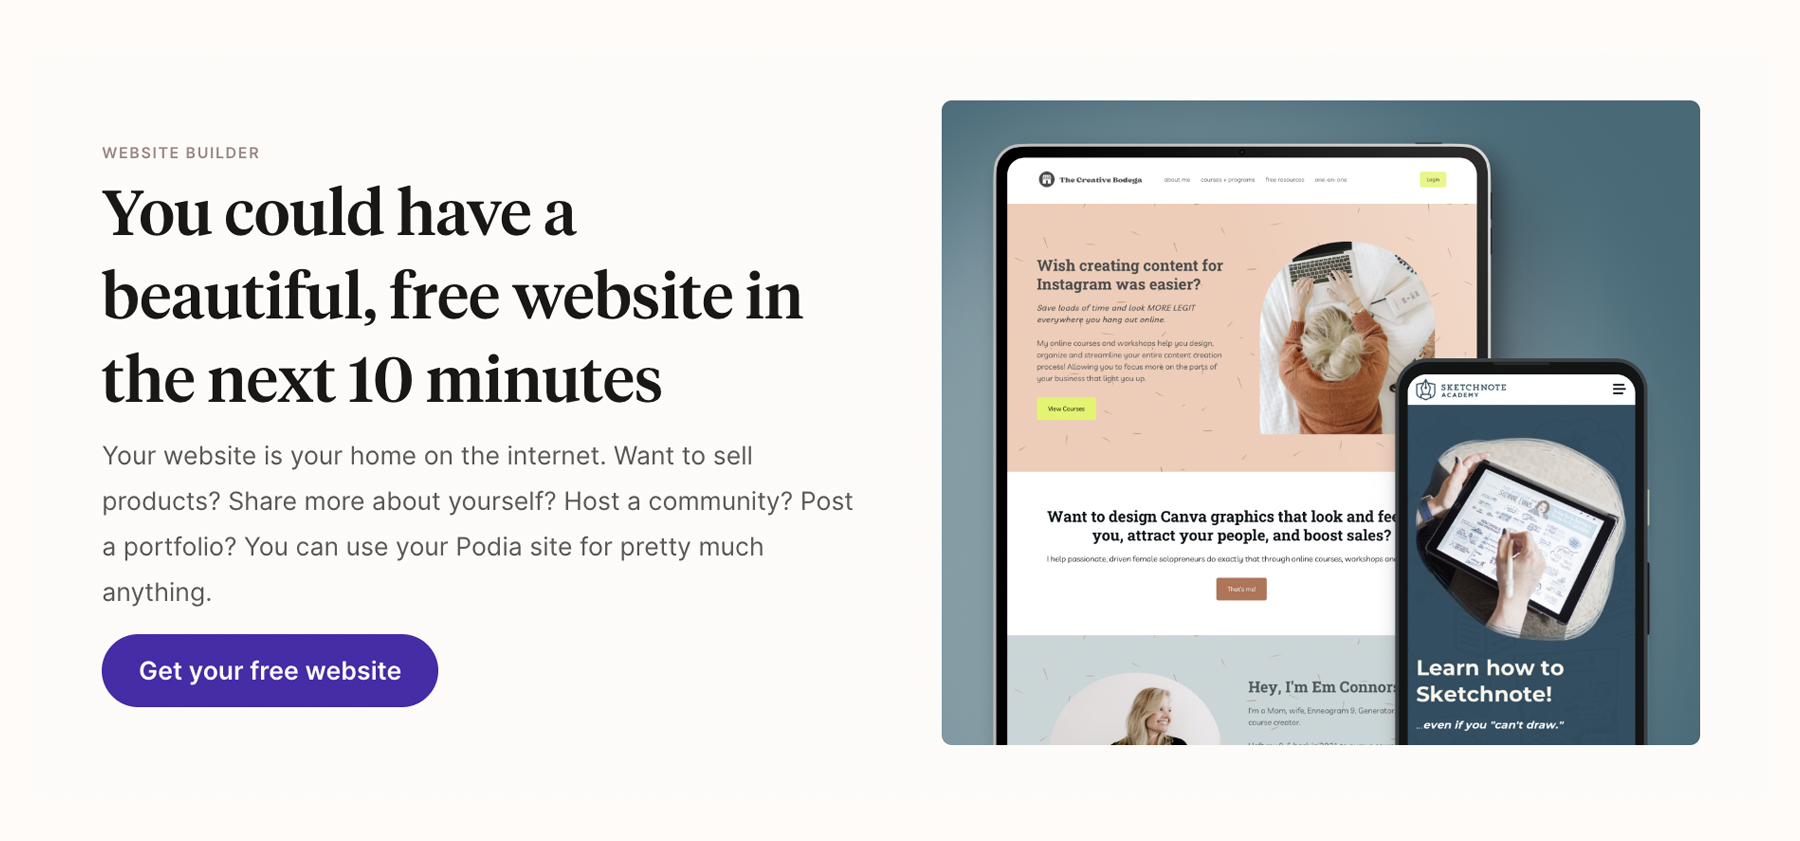 Podia's website builder is so easy that you could have your website in the next 10 minutes. And everything you need — taking payments, delivering digital products, community — is handled for you.